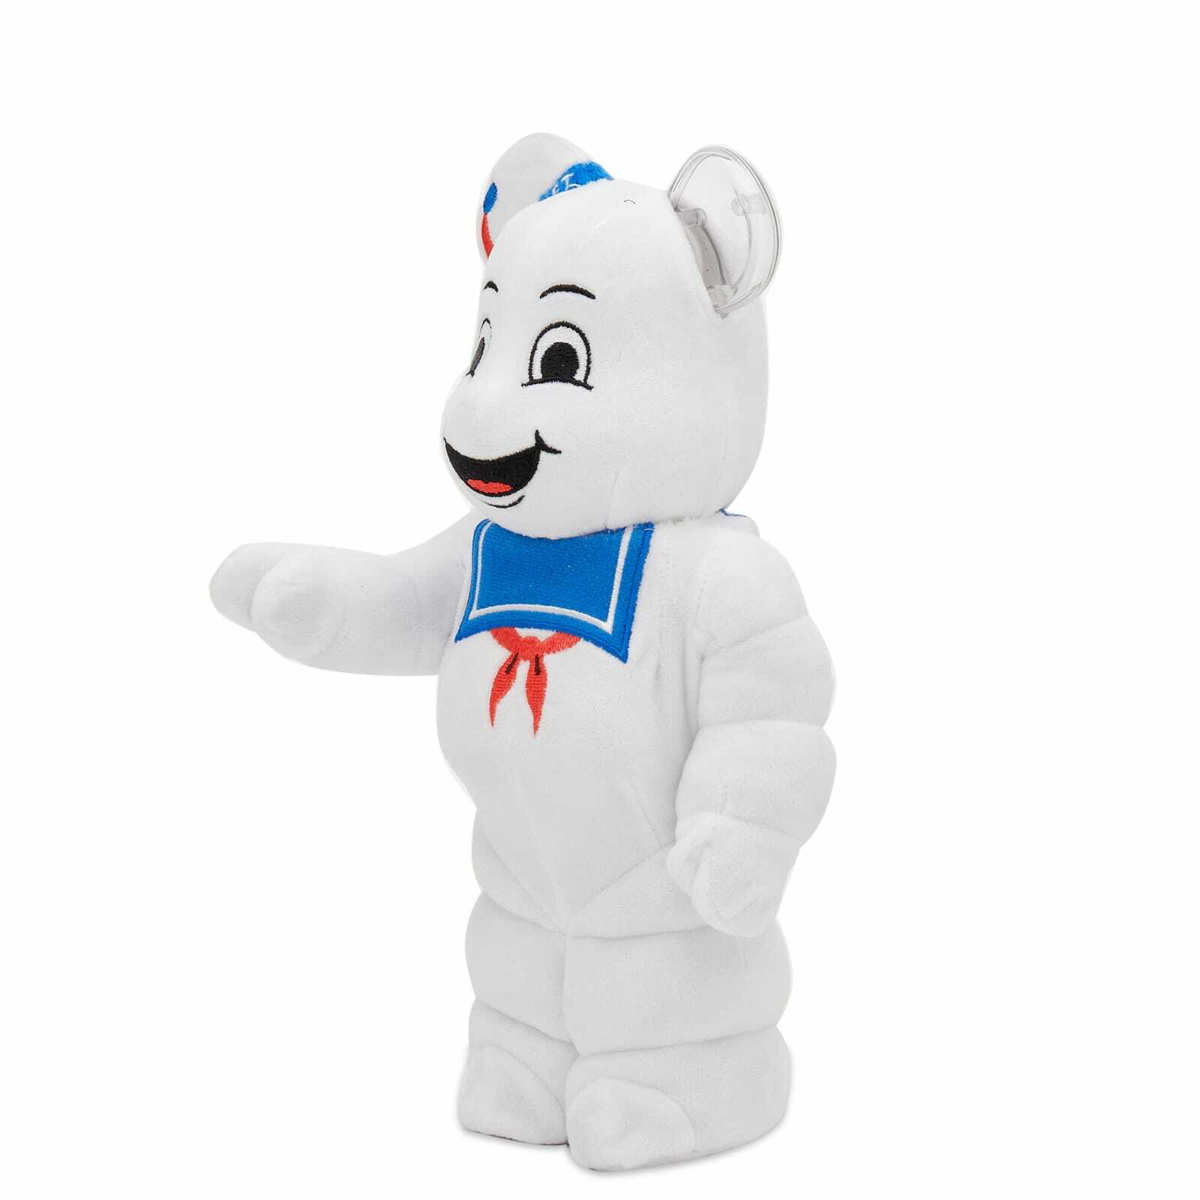 Medicom STAY PUFT MARSHMALLOW MAN COSTUME Be@rbrick in White 400 